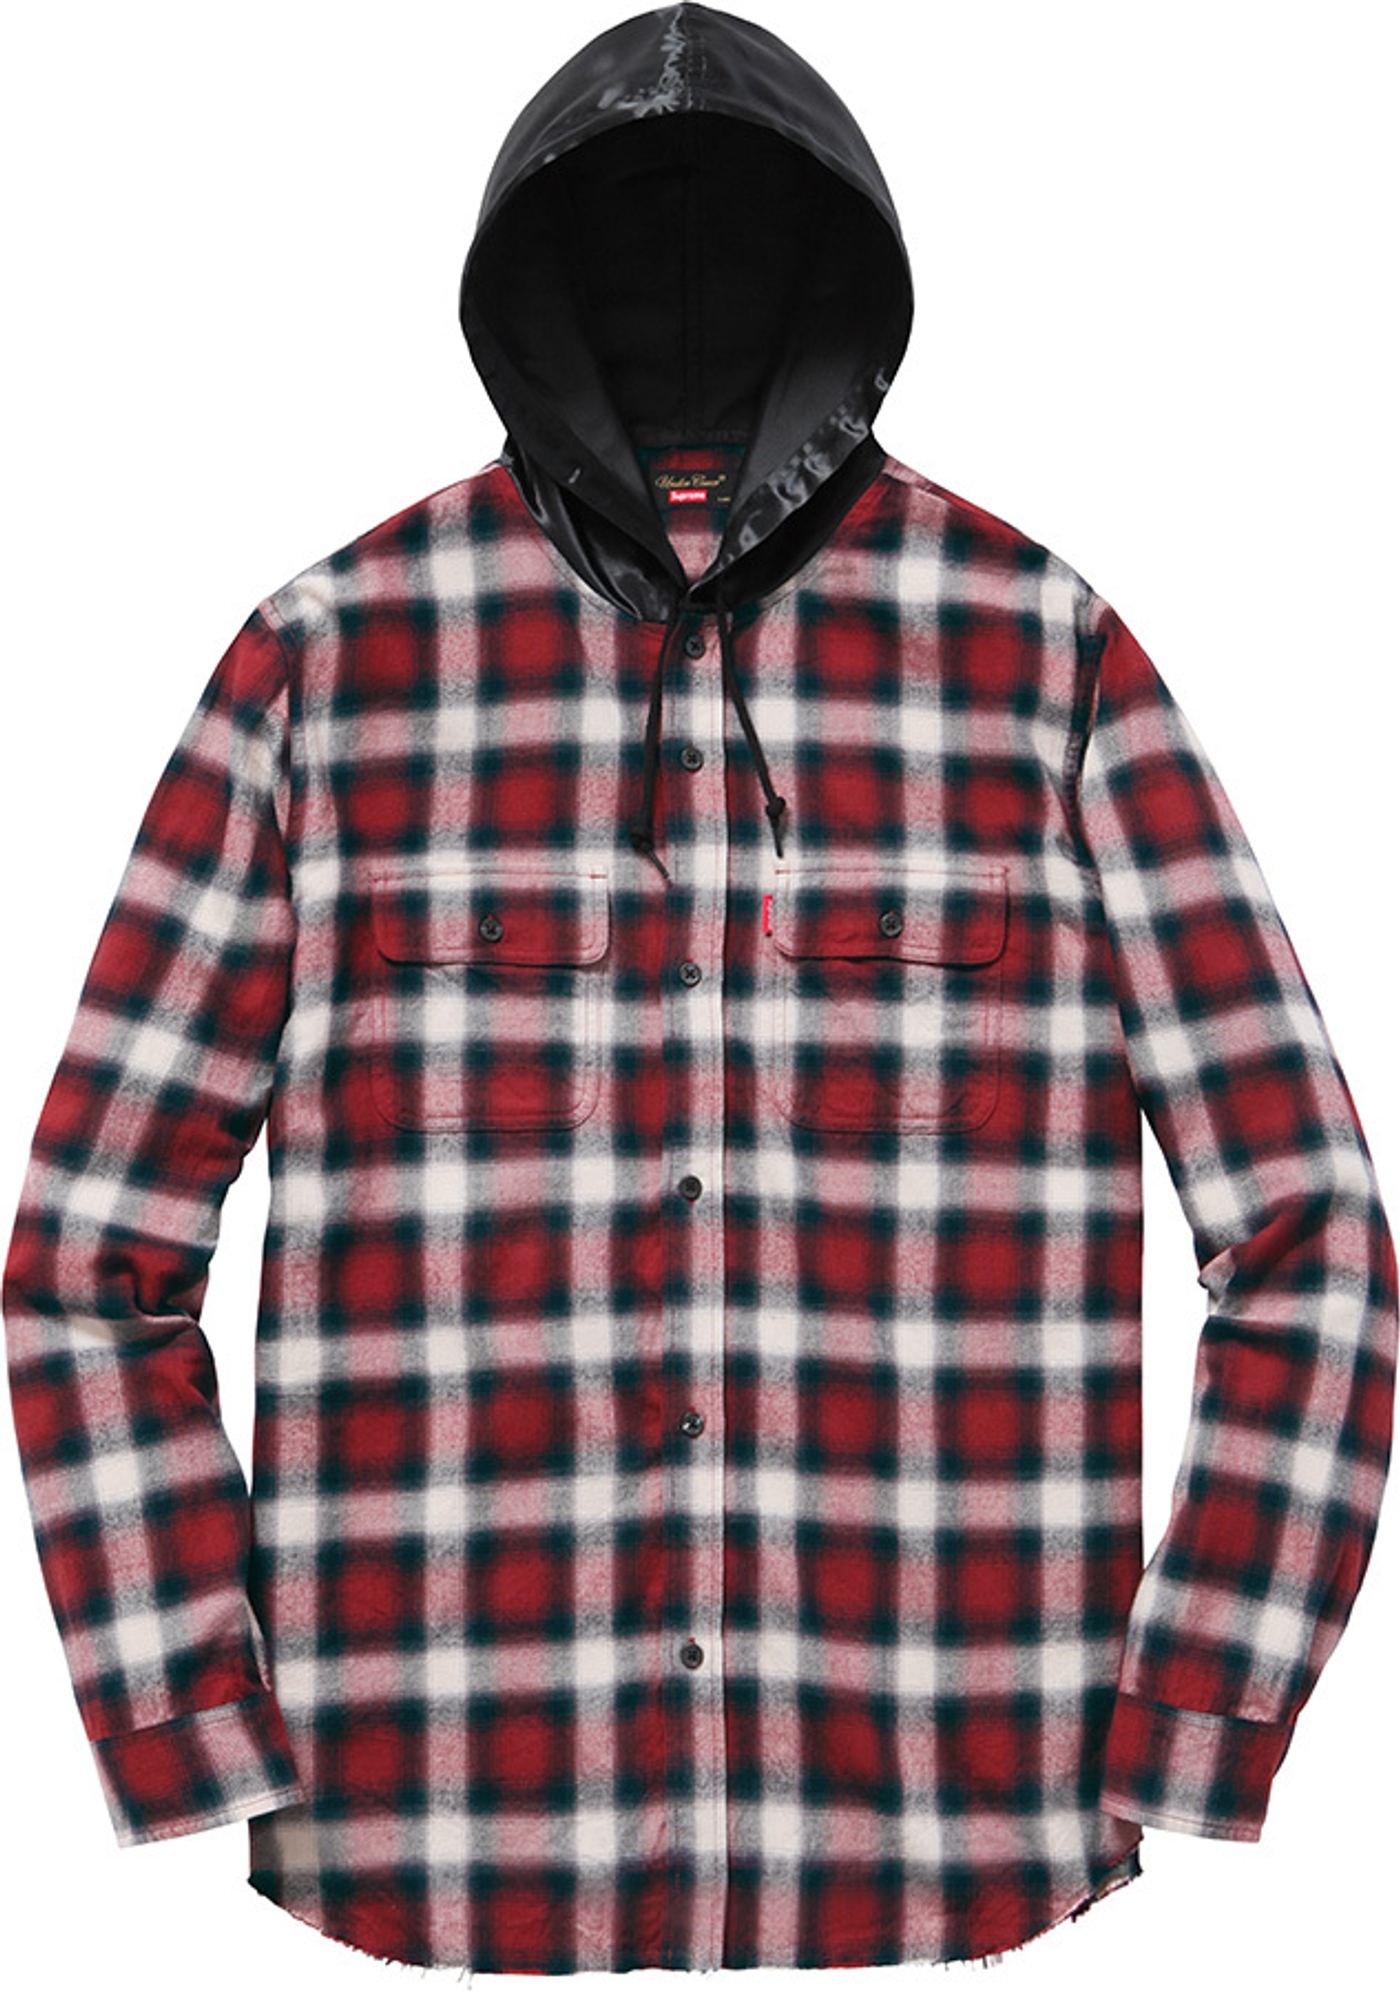 Satin Hooded Flannel Shirt (15/31)